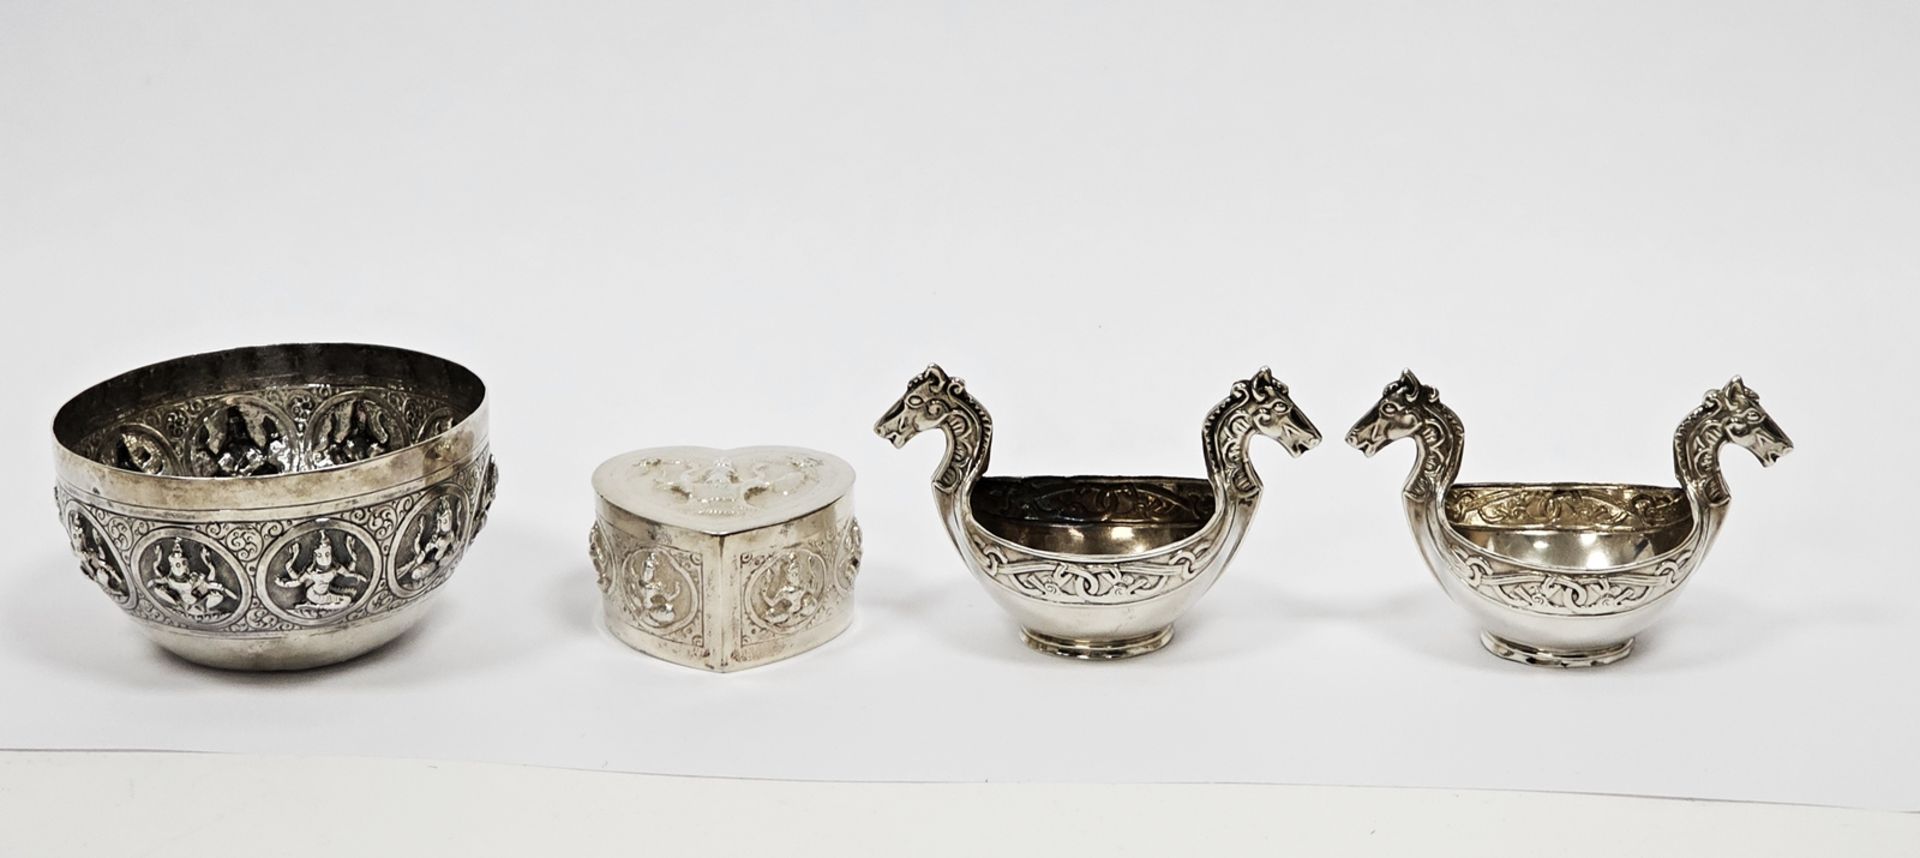 Indian white metal small sugar bowl, of circular form decorated with a band of deities, 7.5cm